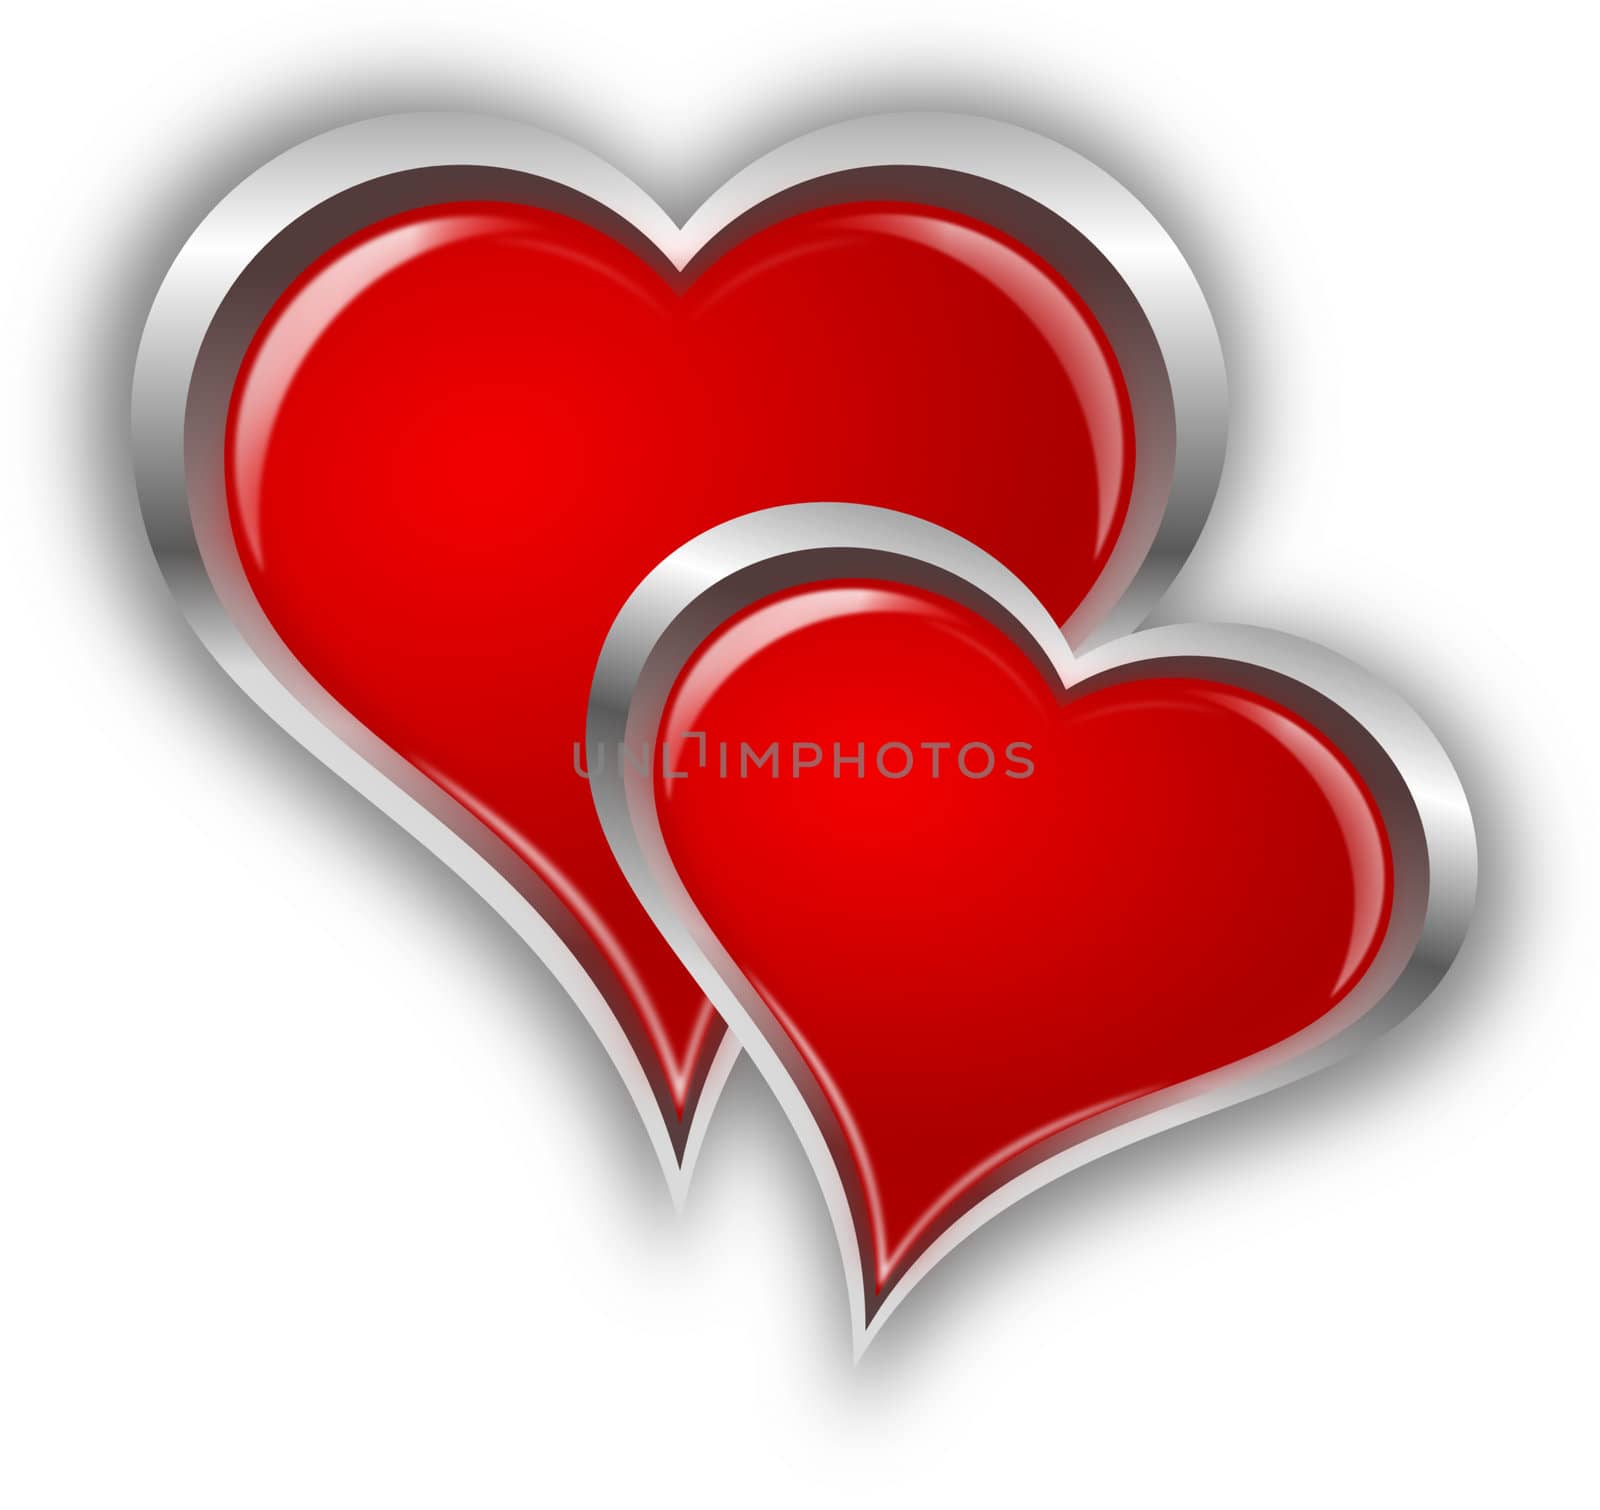 Pair of hearts isolated on white background, illustration.